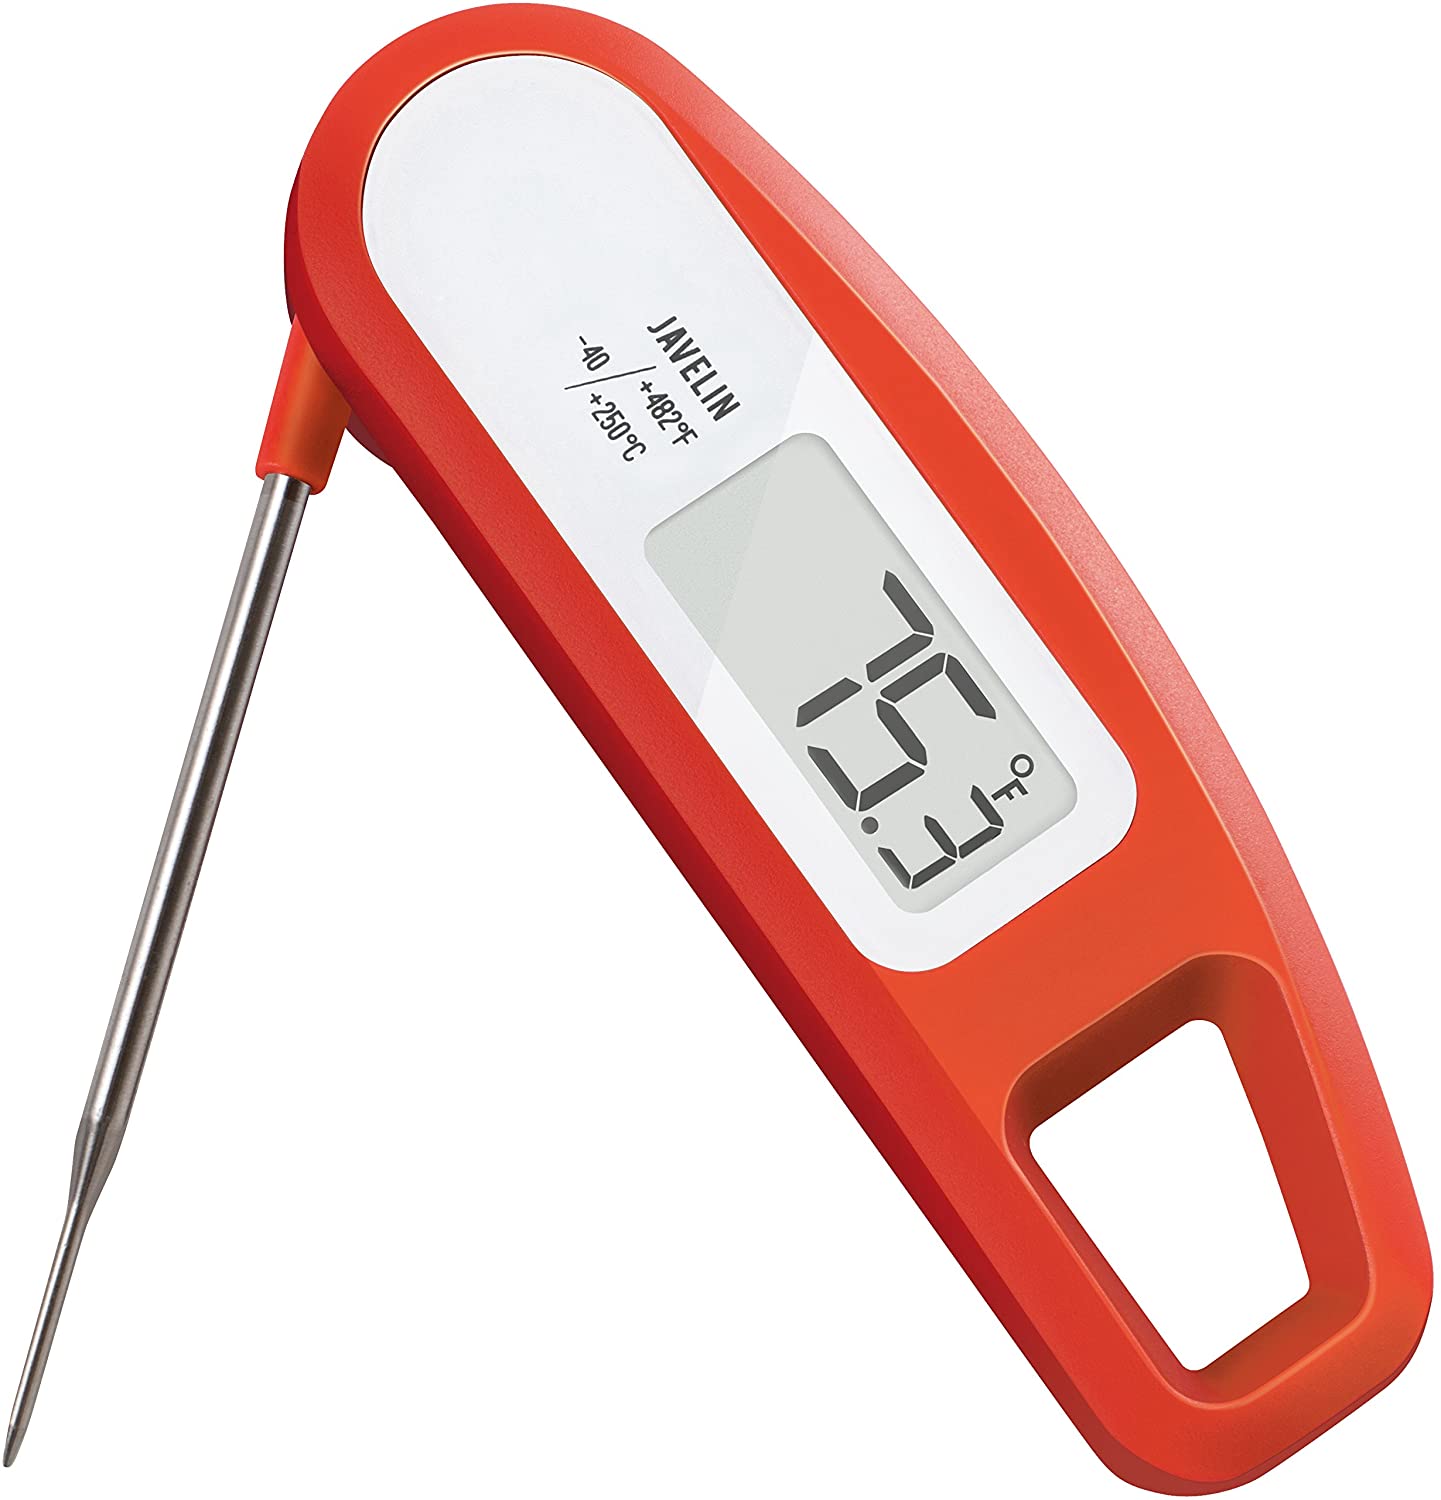 https://www.dontwasteyourmoney.com/wp-content/uploads/2020/07/lavatools-pt12-javelin-instant-read-digital-food-thermometer-food-thermometer.jpg